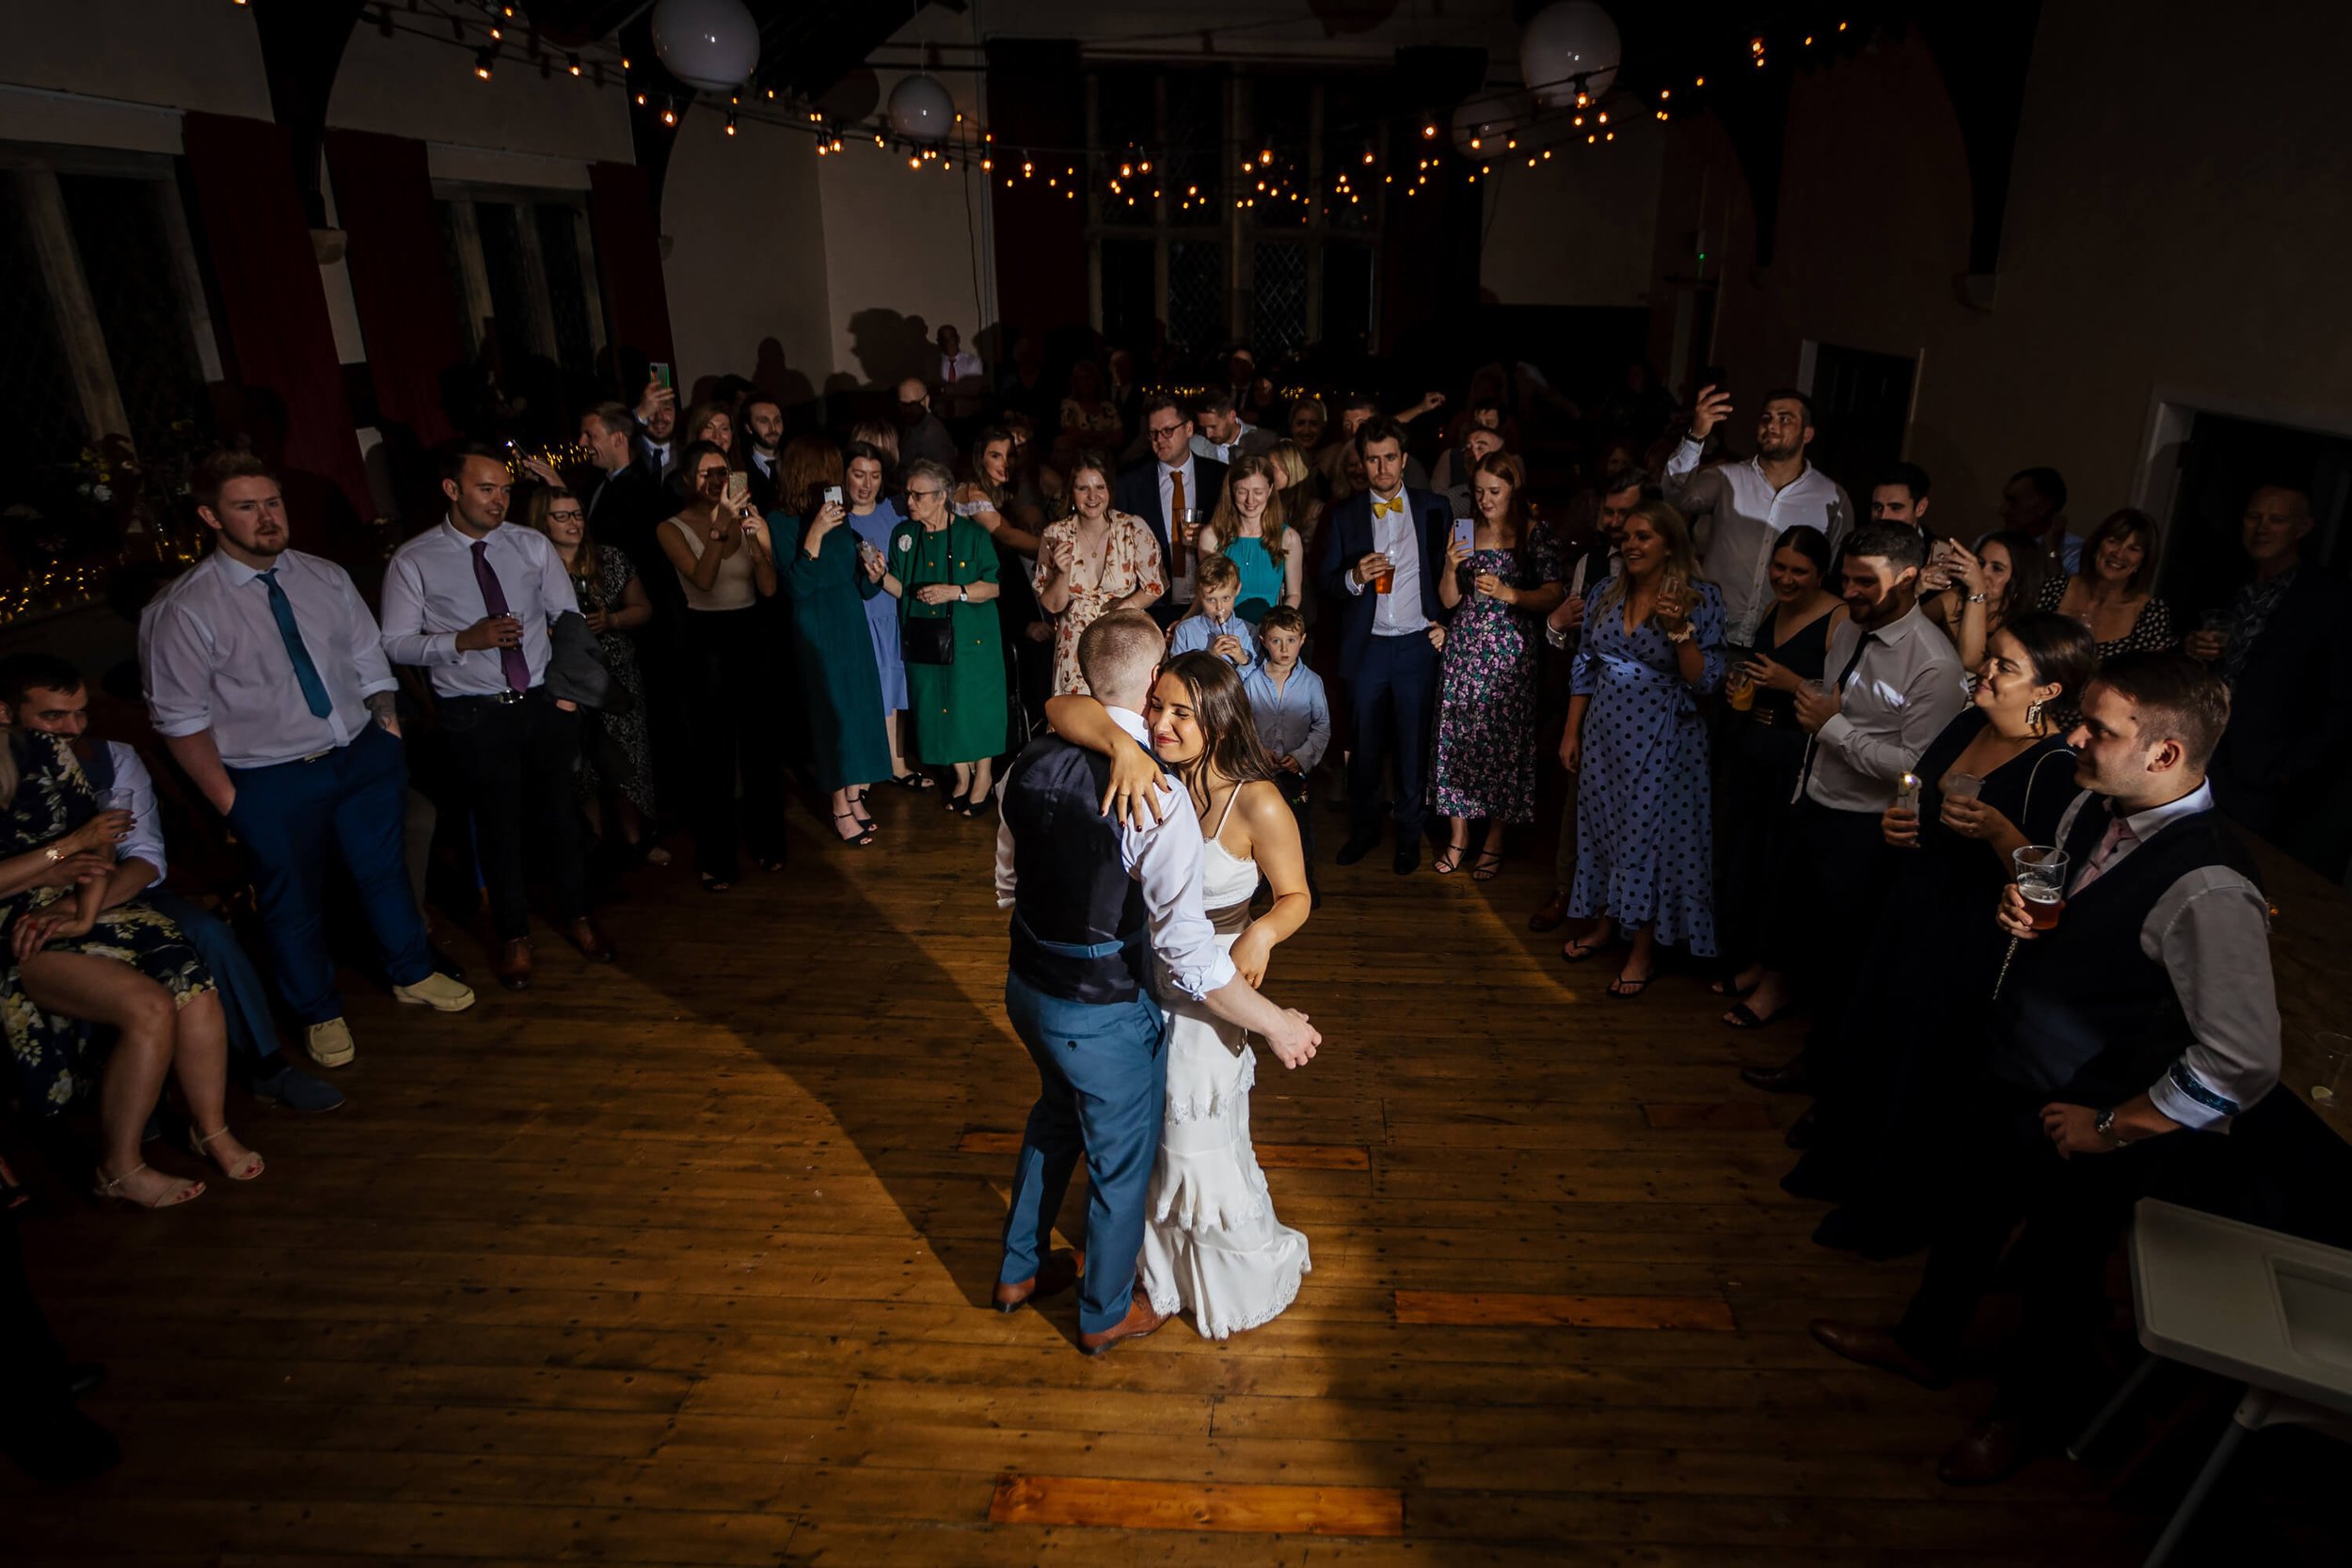 First dance as man and wife at a Yorkshire wedding